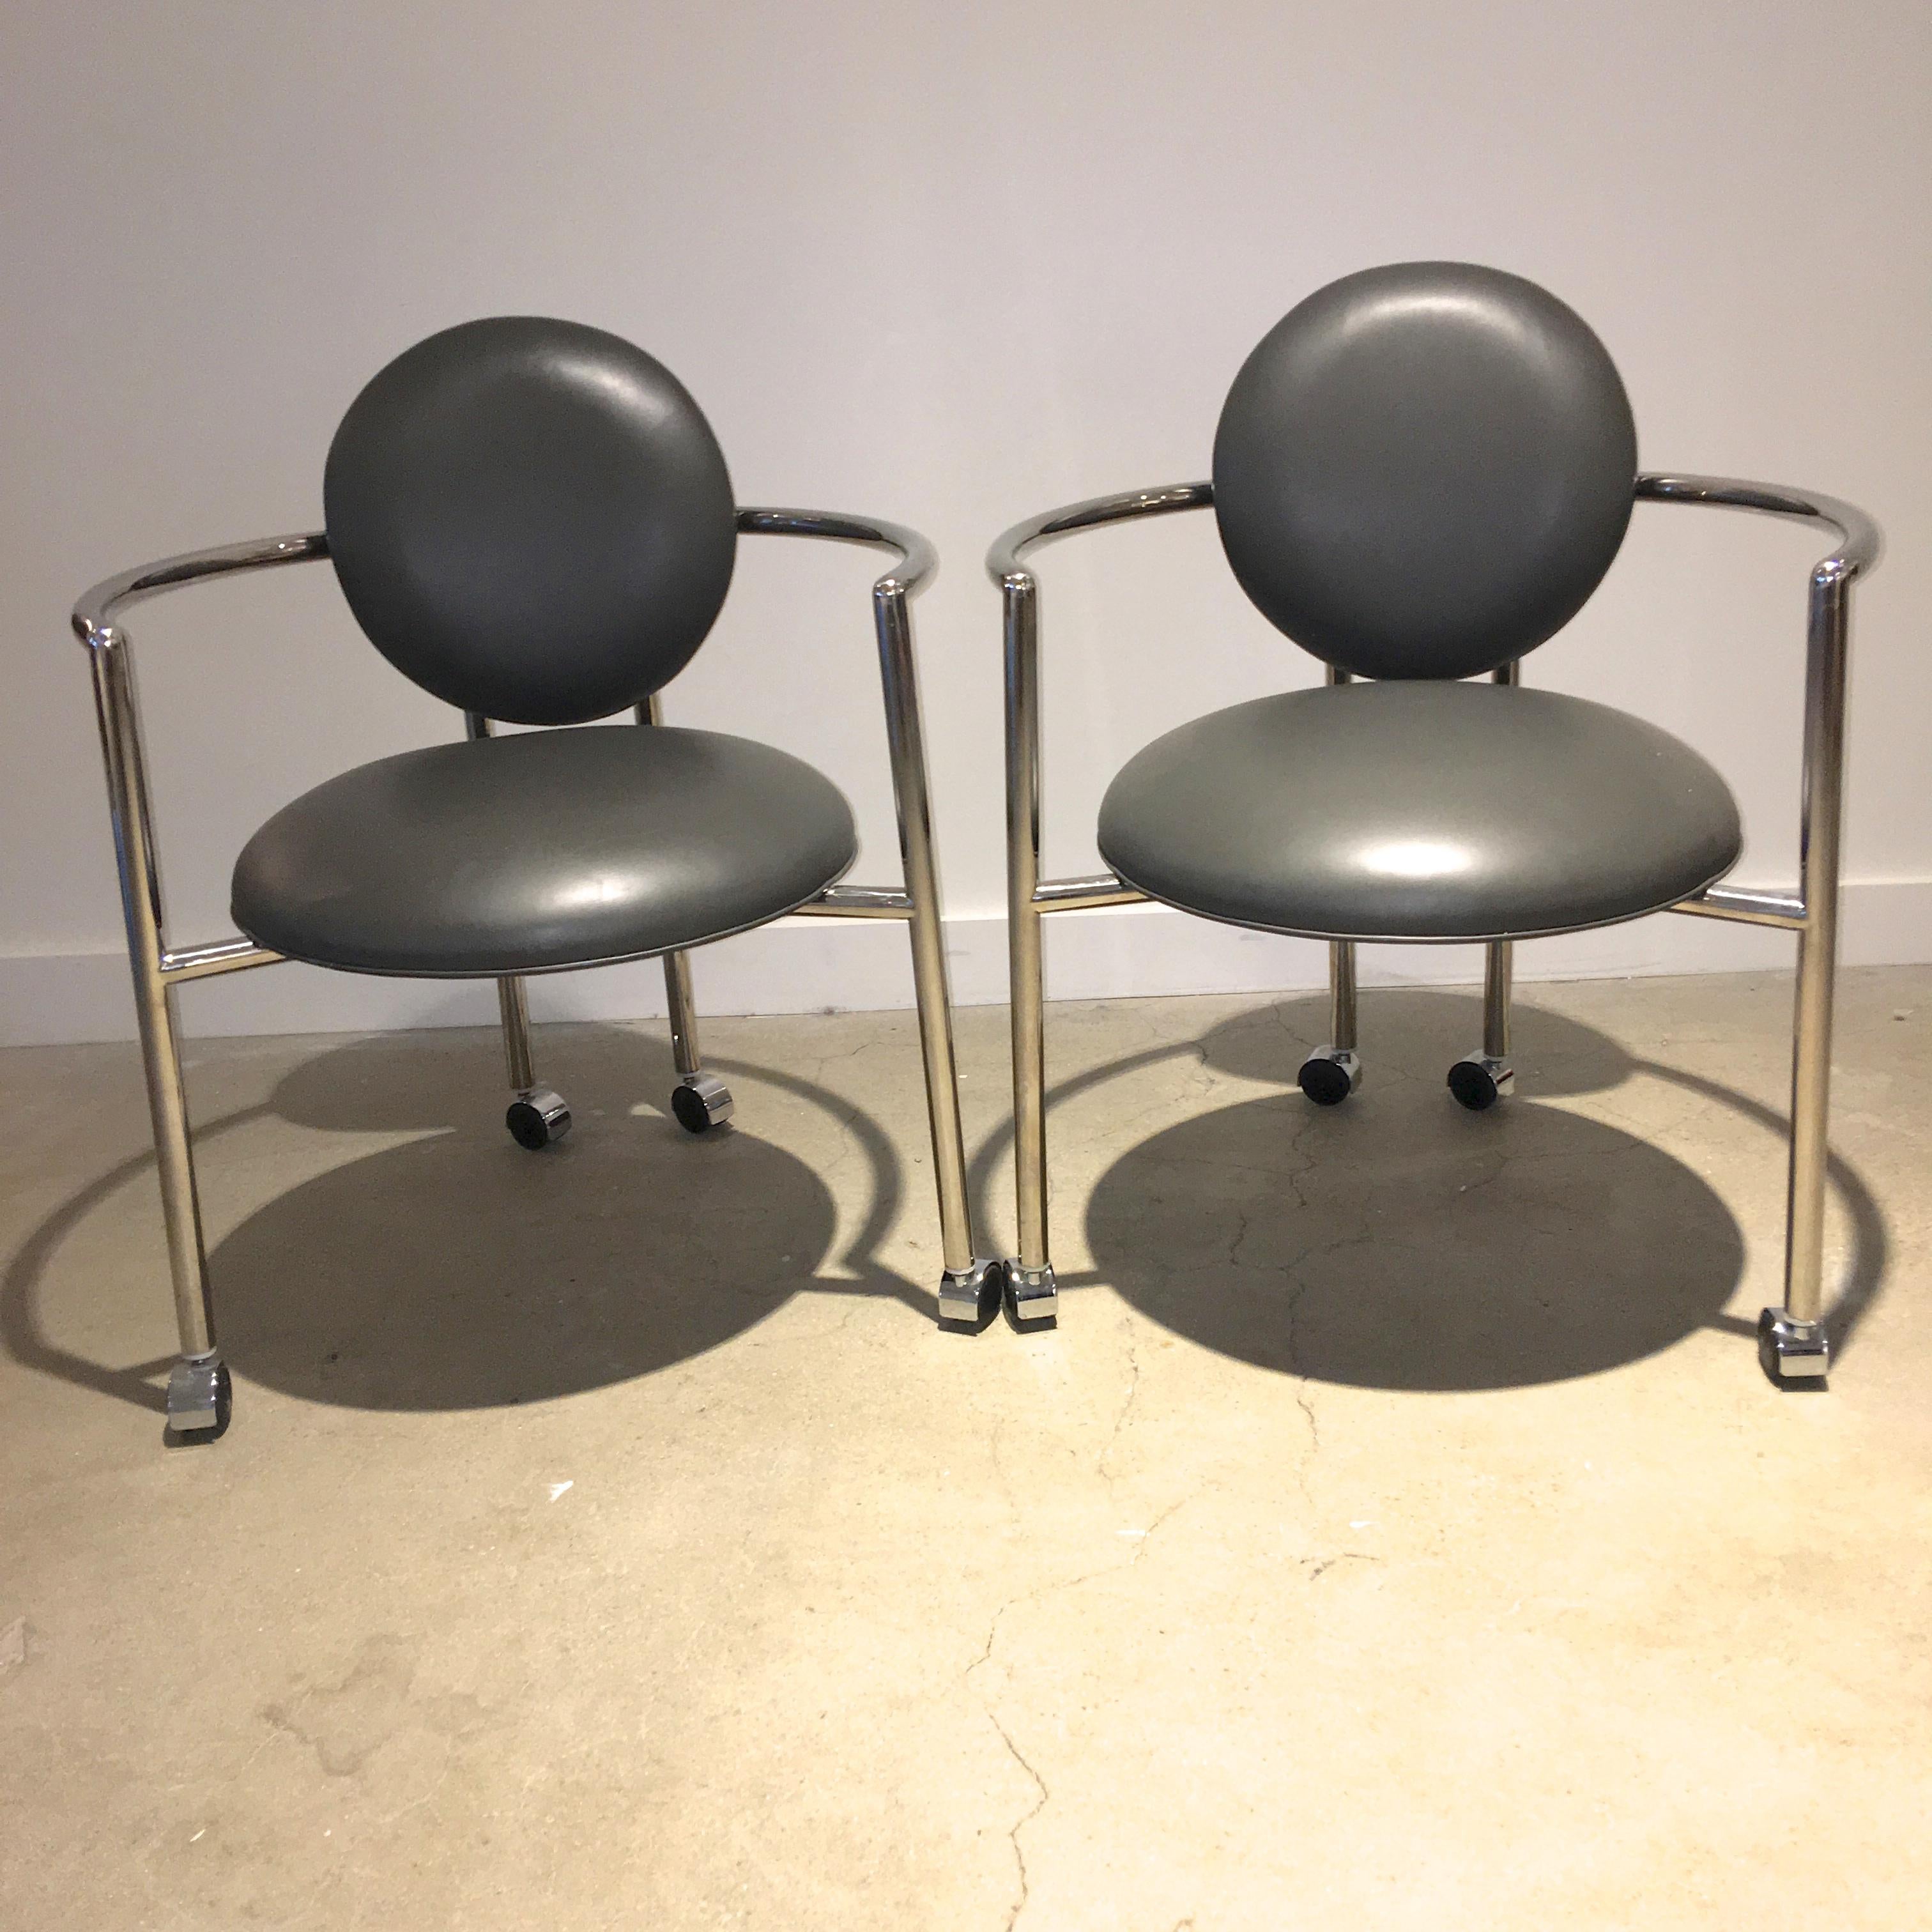 American Pair of Moon Chairs by Stanley Jay Friedman for Brueton